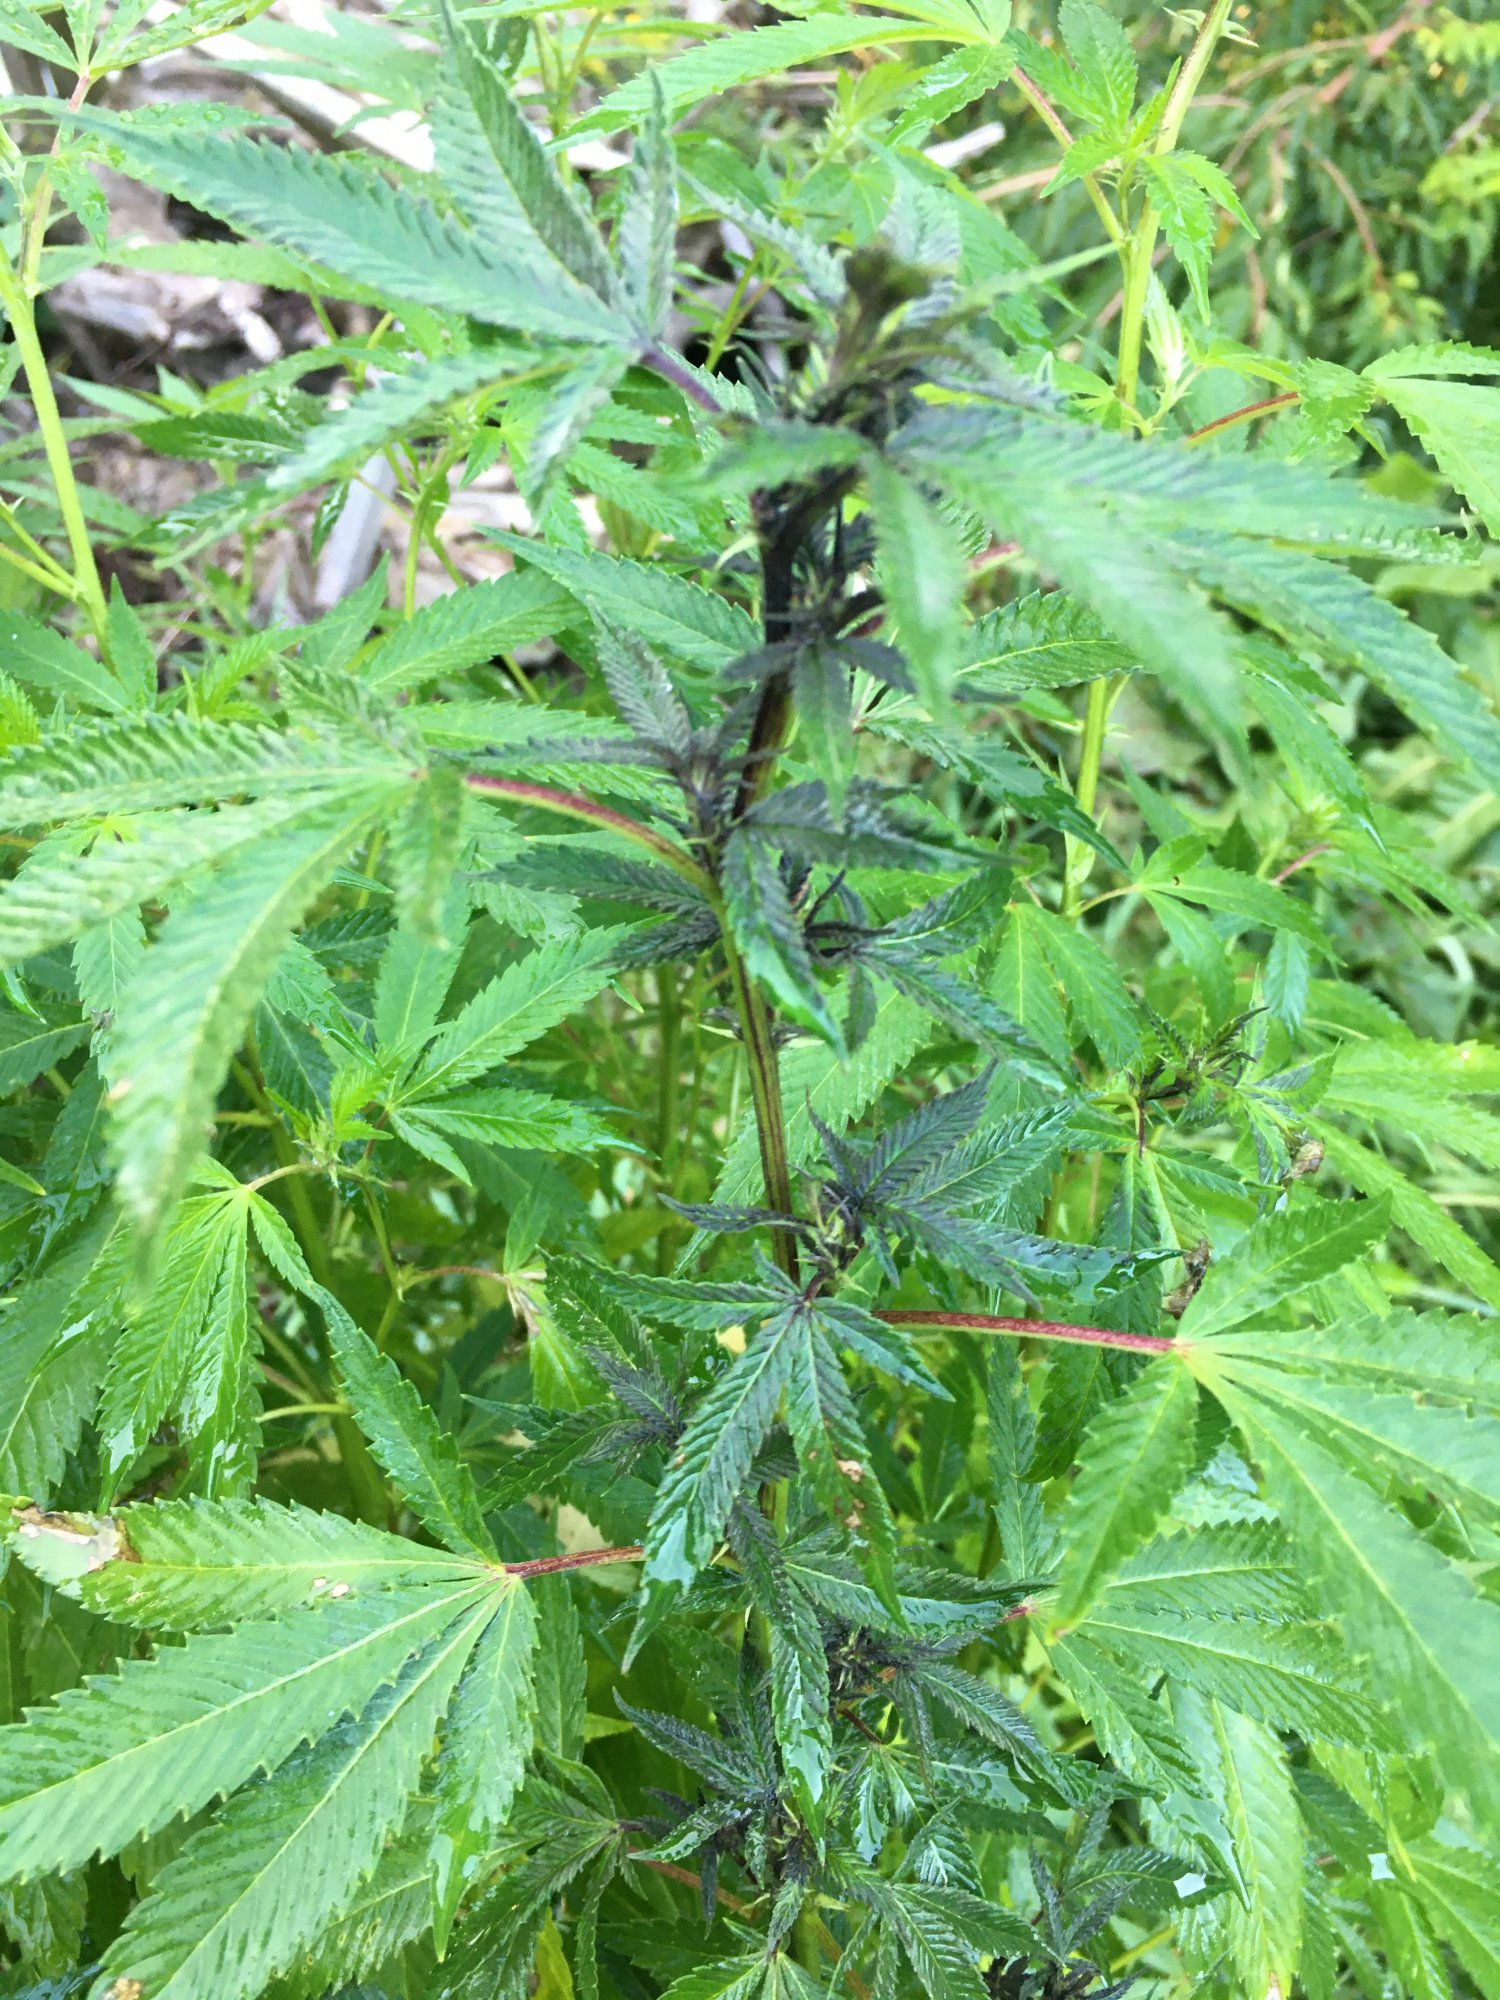 Is this the strain or a problem blackening of 1 stem in a few plants 2